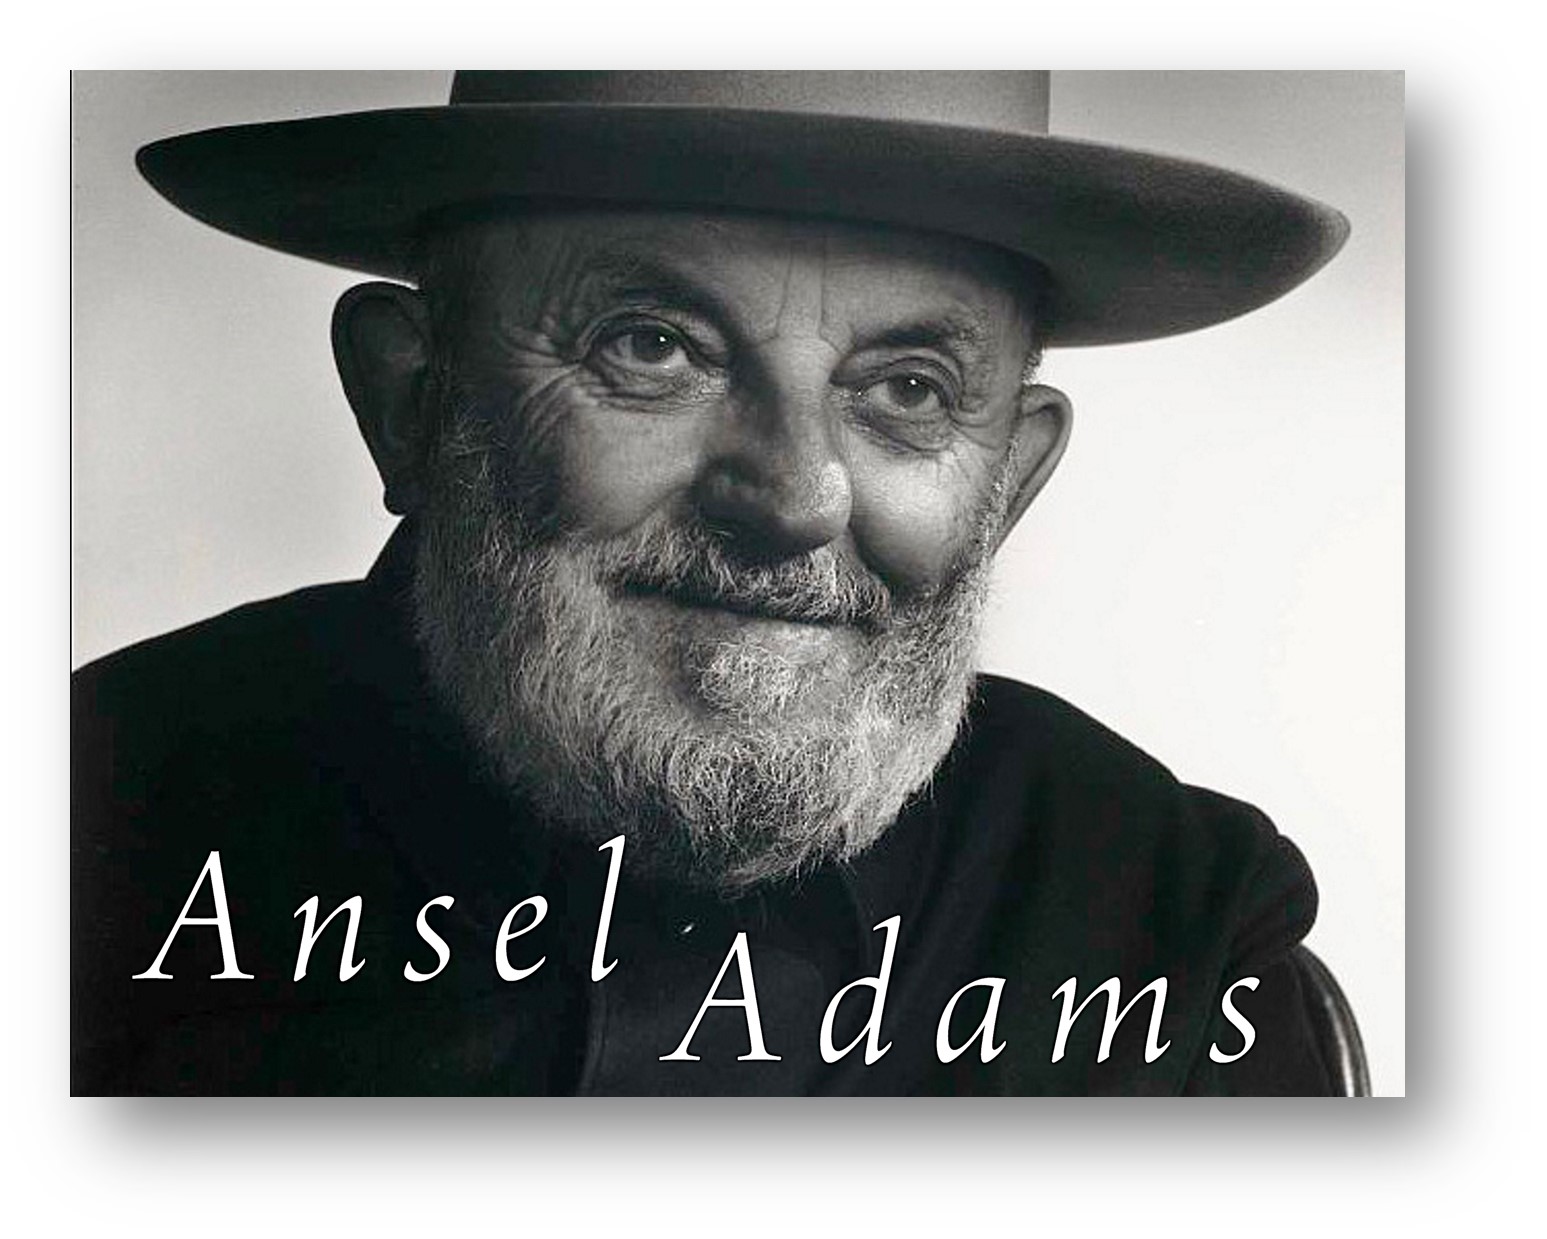 Ansel Easton Adams: The Man and His Photography